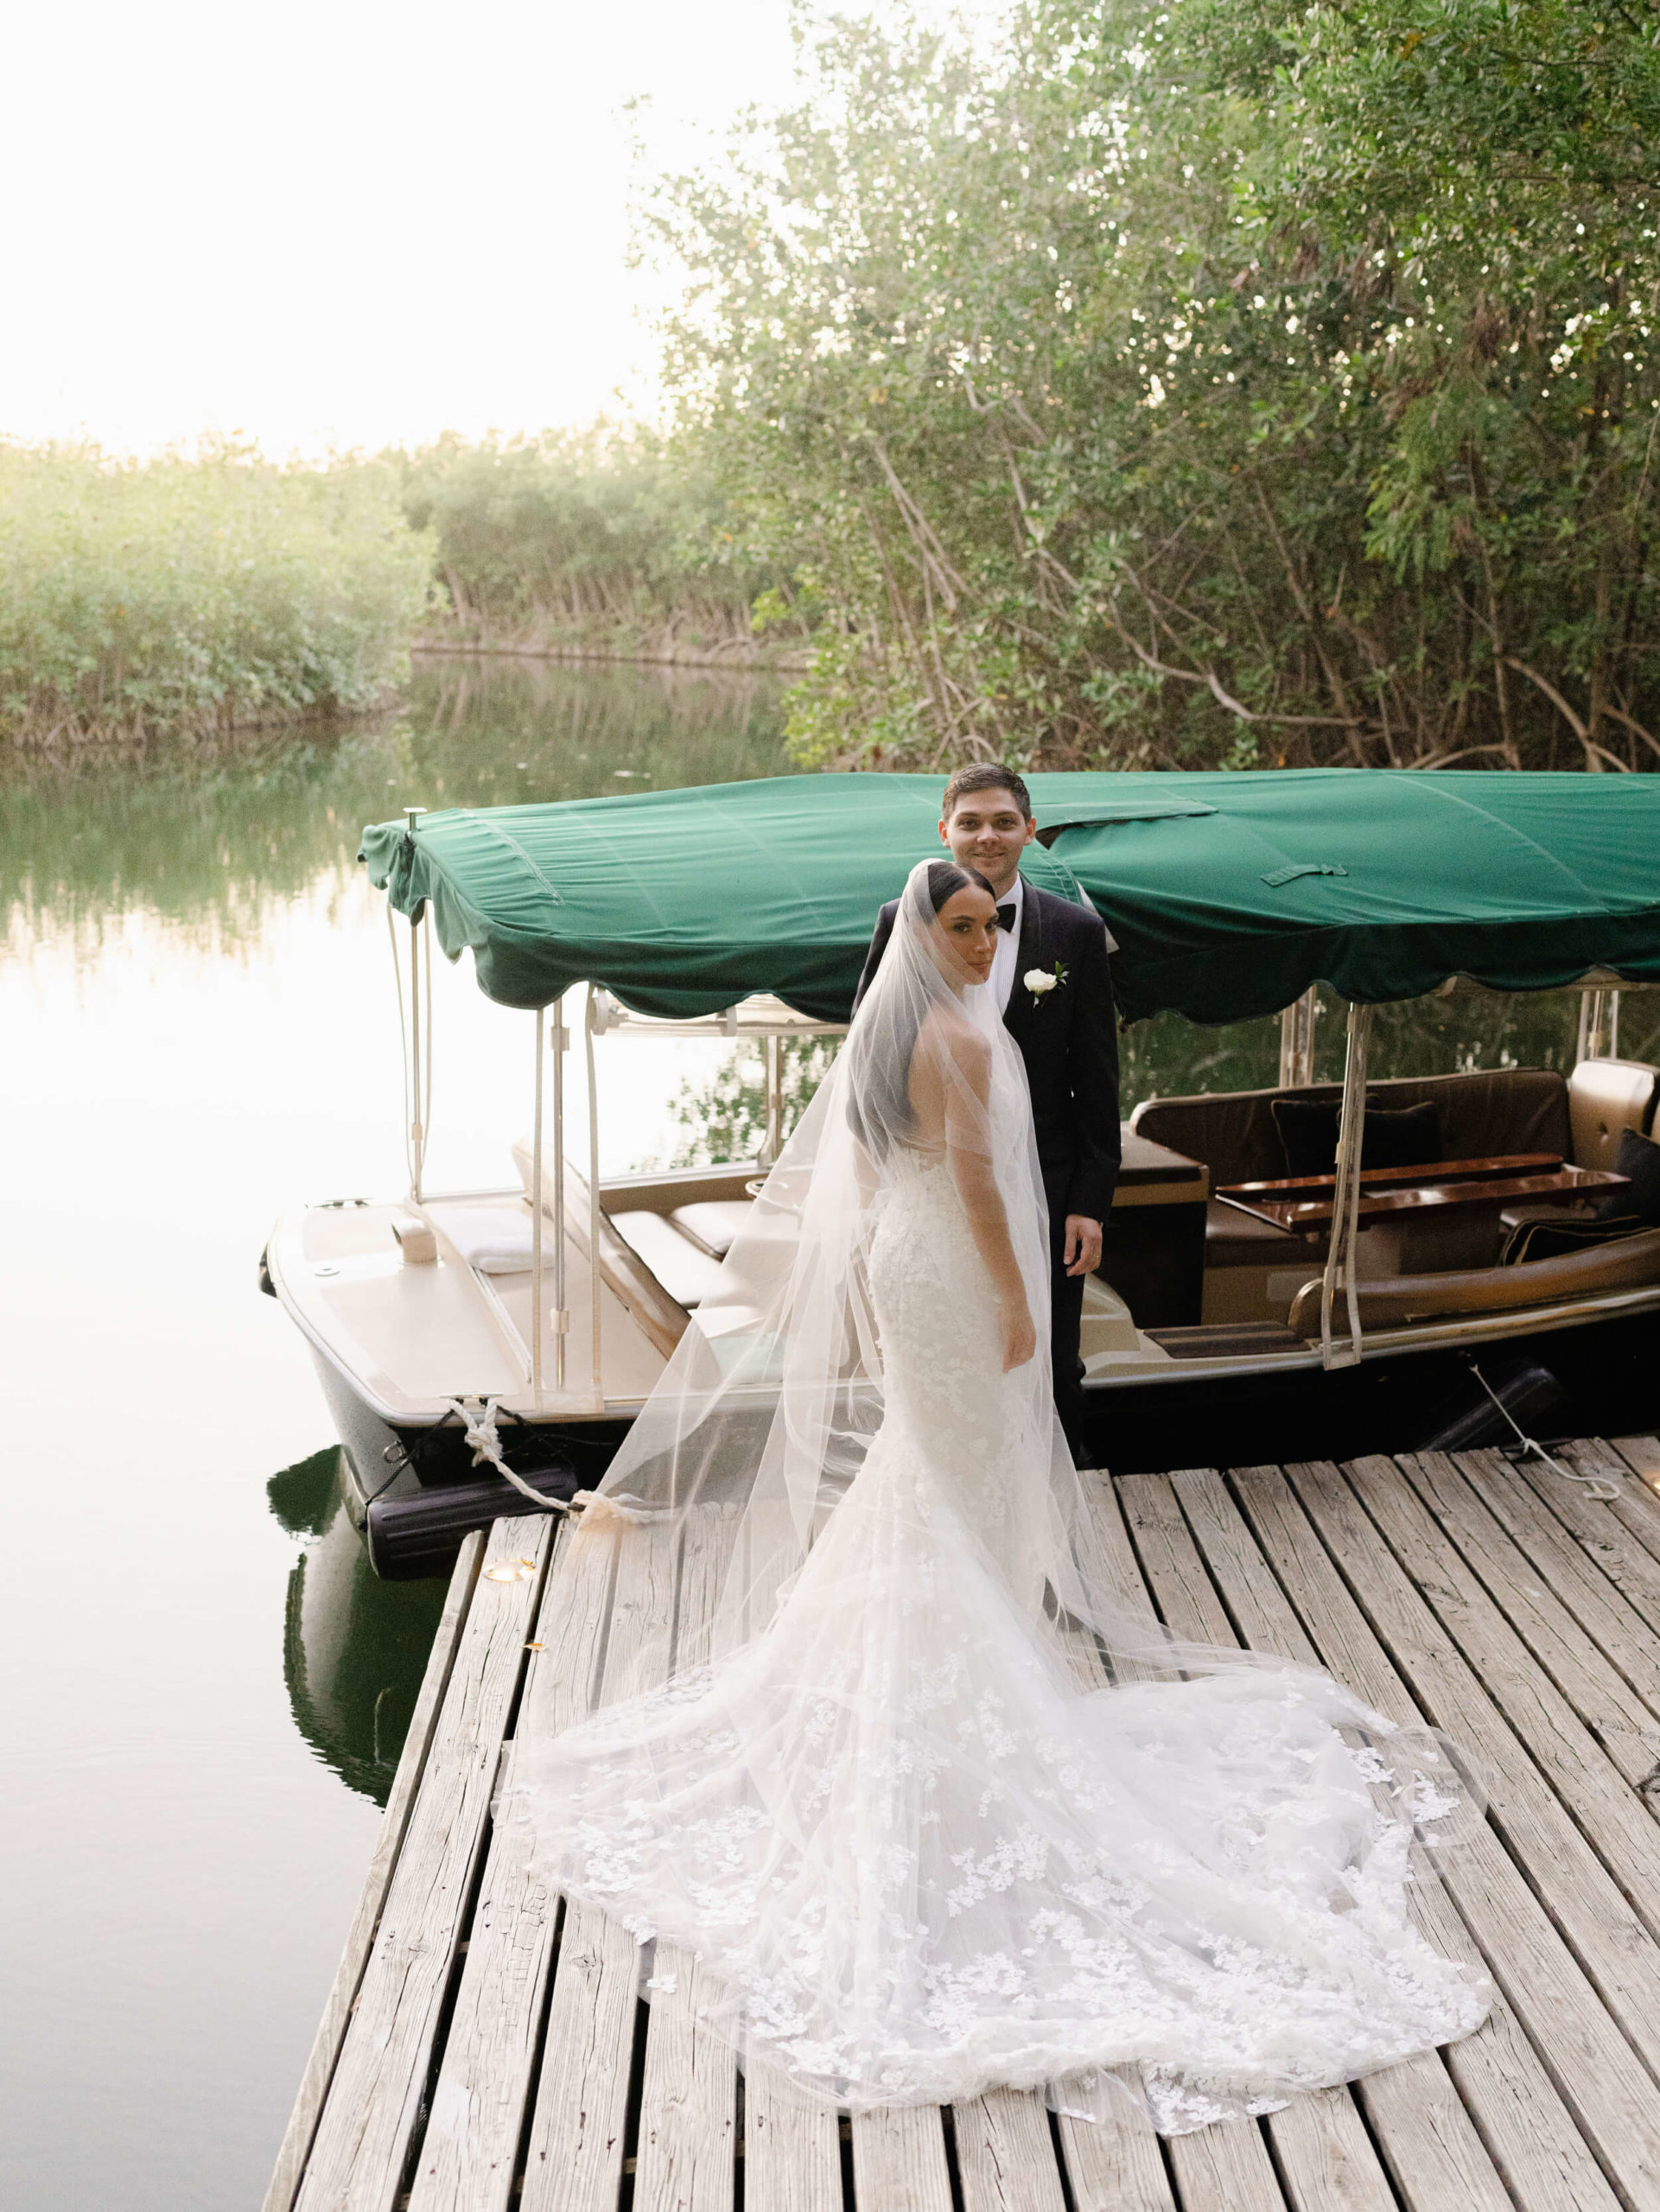 Danielle and Lucas boarding a boat on a river at the Rosewood Mayakoba Resort after their wedding